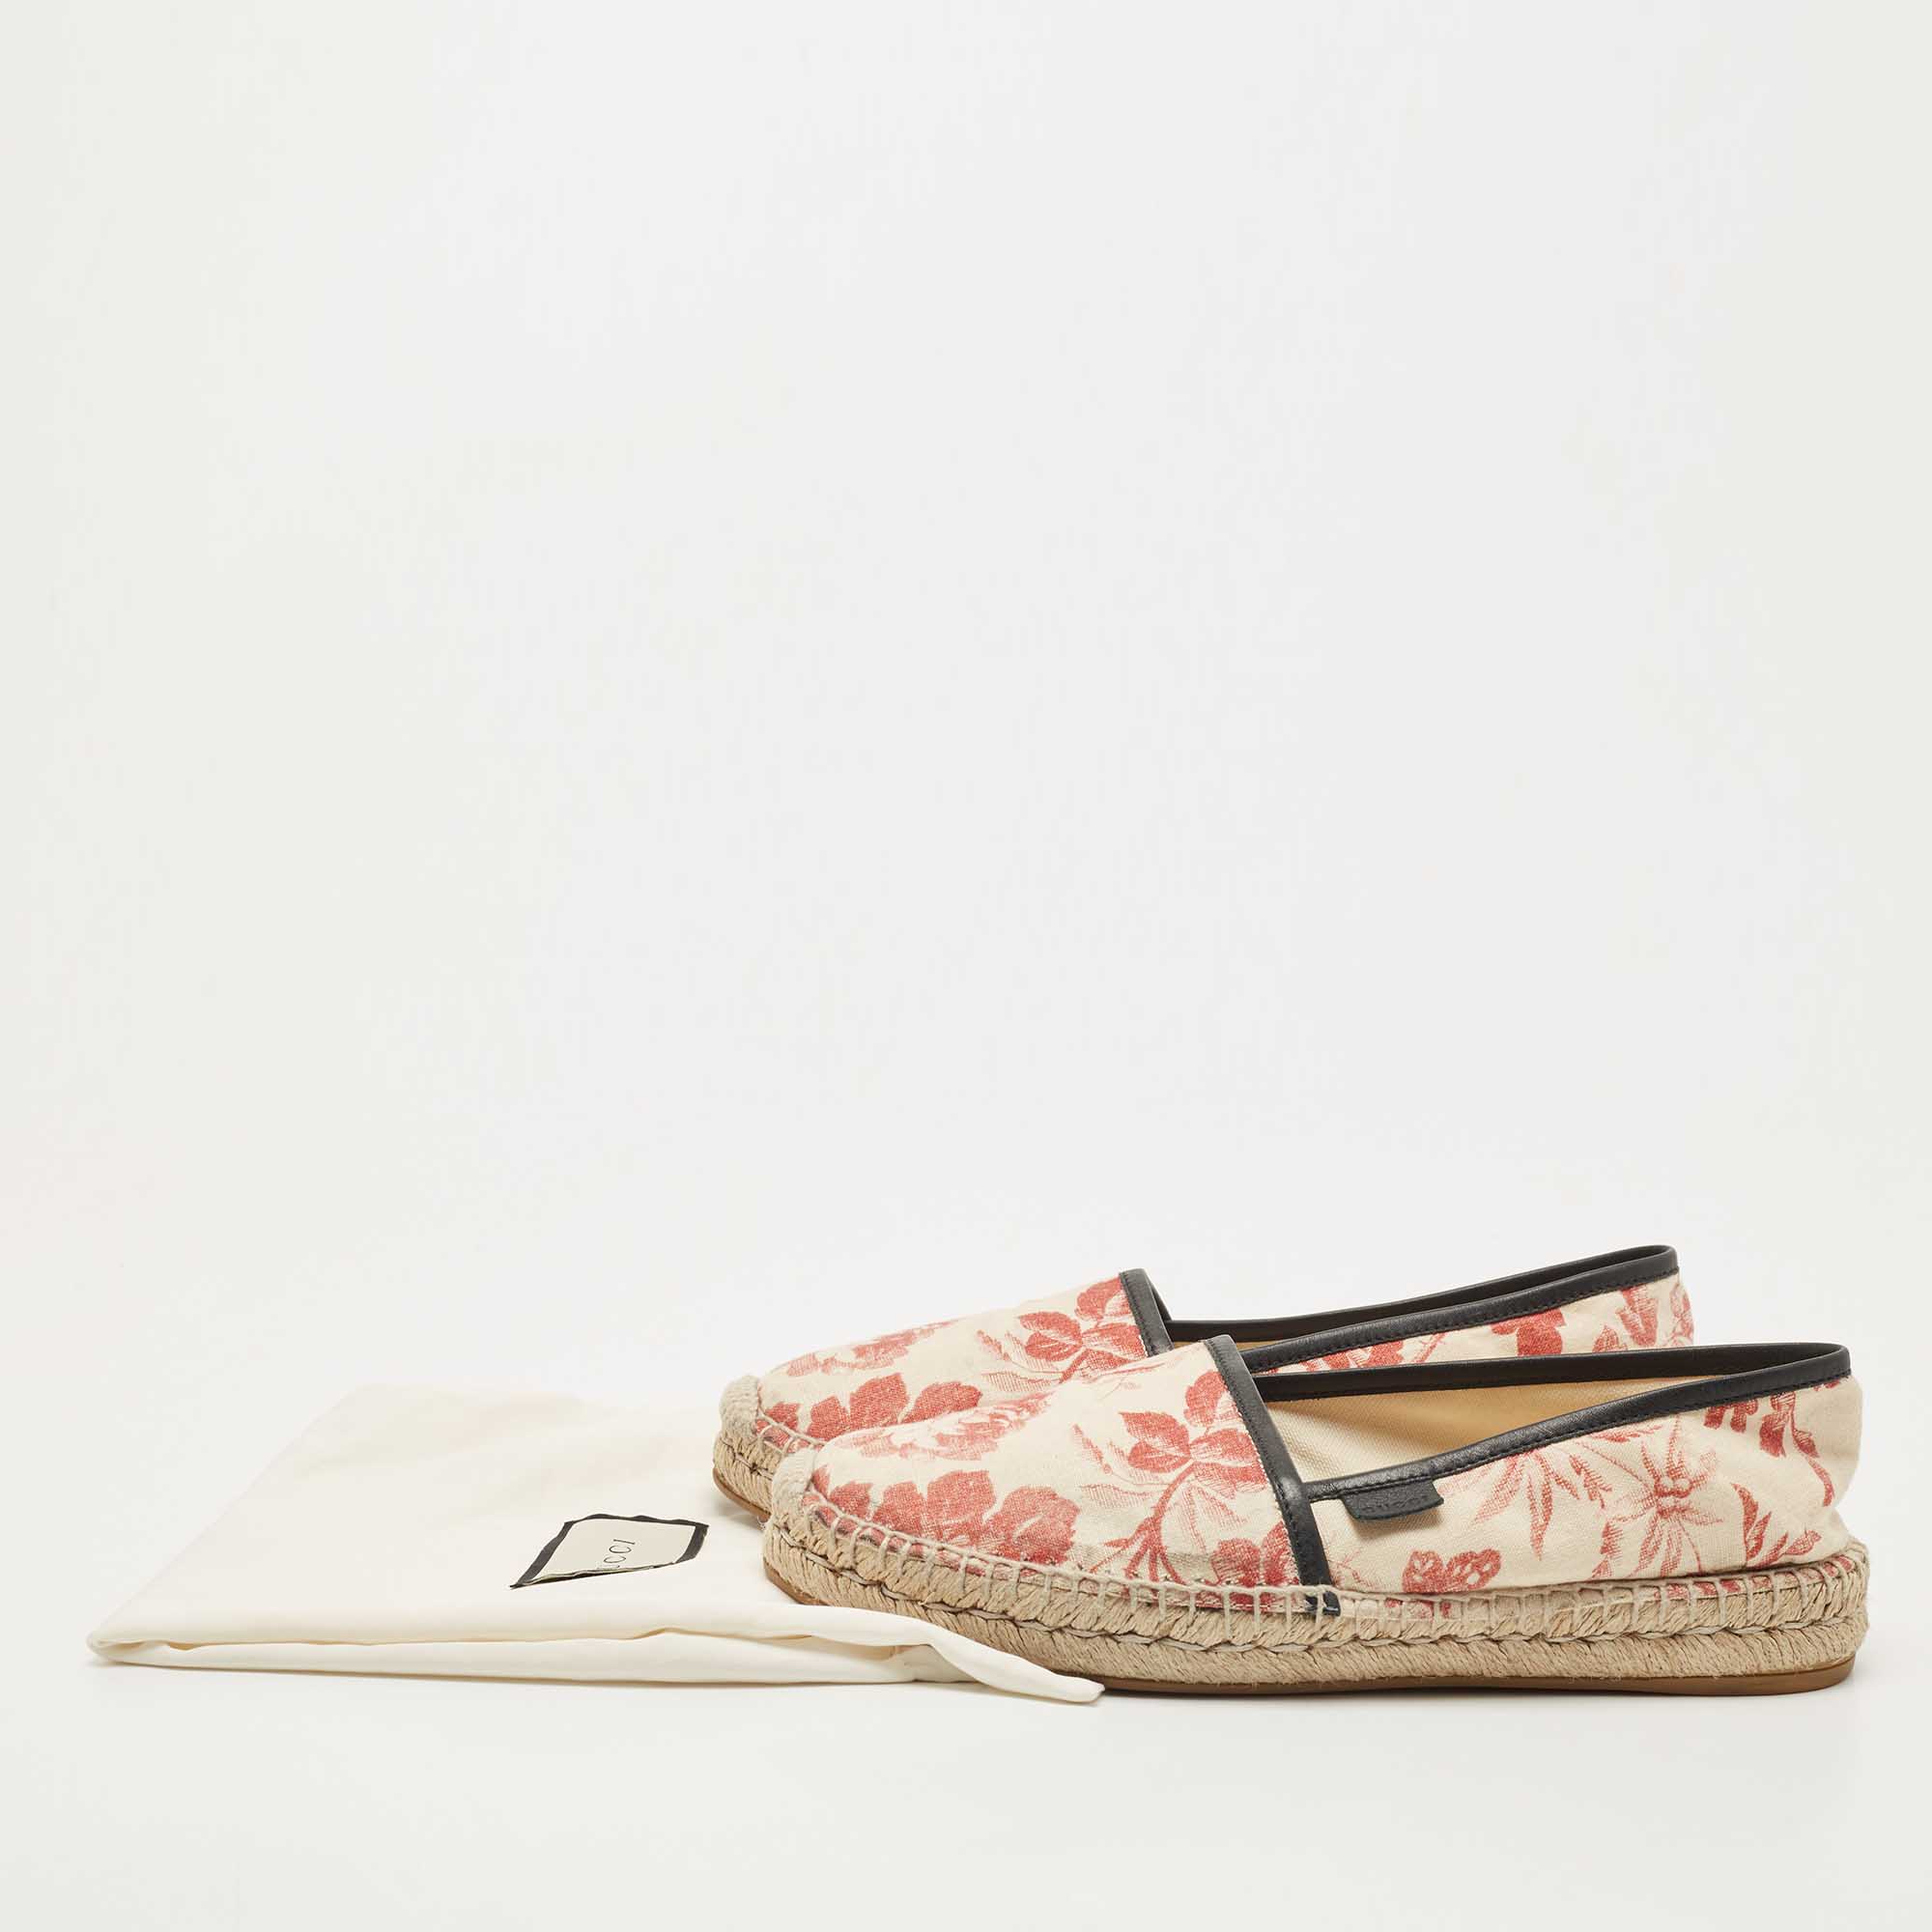 Gucci Beige Floral Printed Fabric Slip On Espradrille Flats Size 38.5